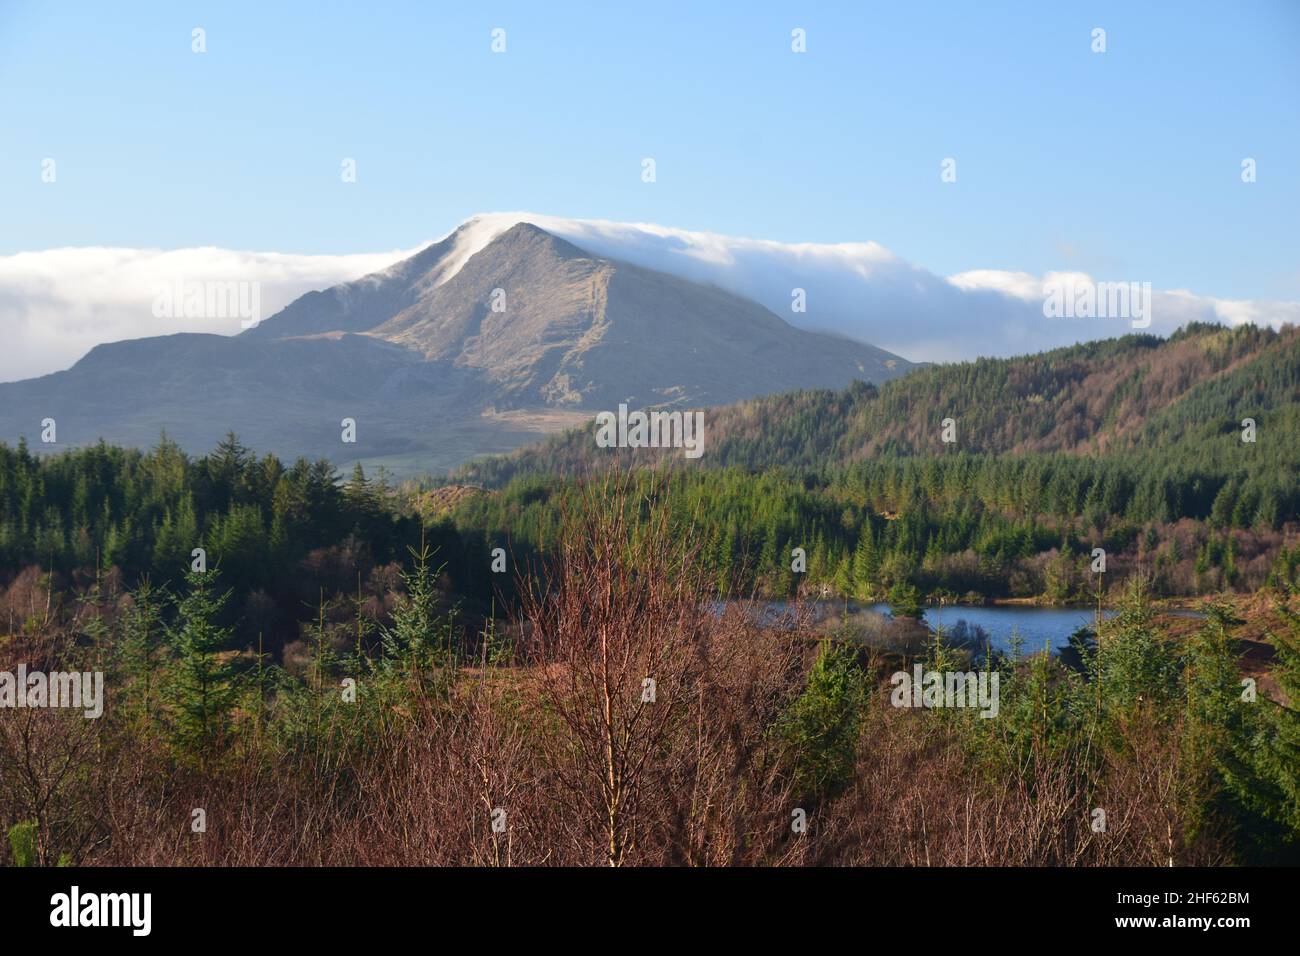 Mountains, Clouds, Forests, Blue skies and beautiful scenery on a trail walk in Gwydyr forest Snowdonia national park Wales on a January morning. Stock Photo